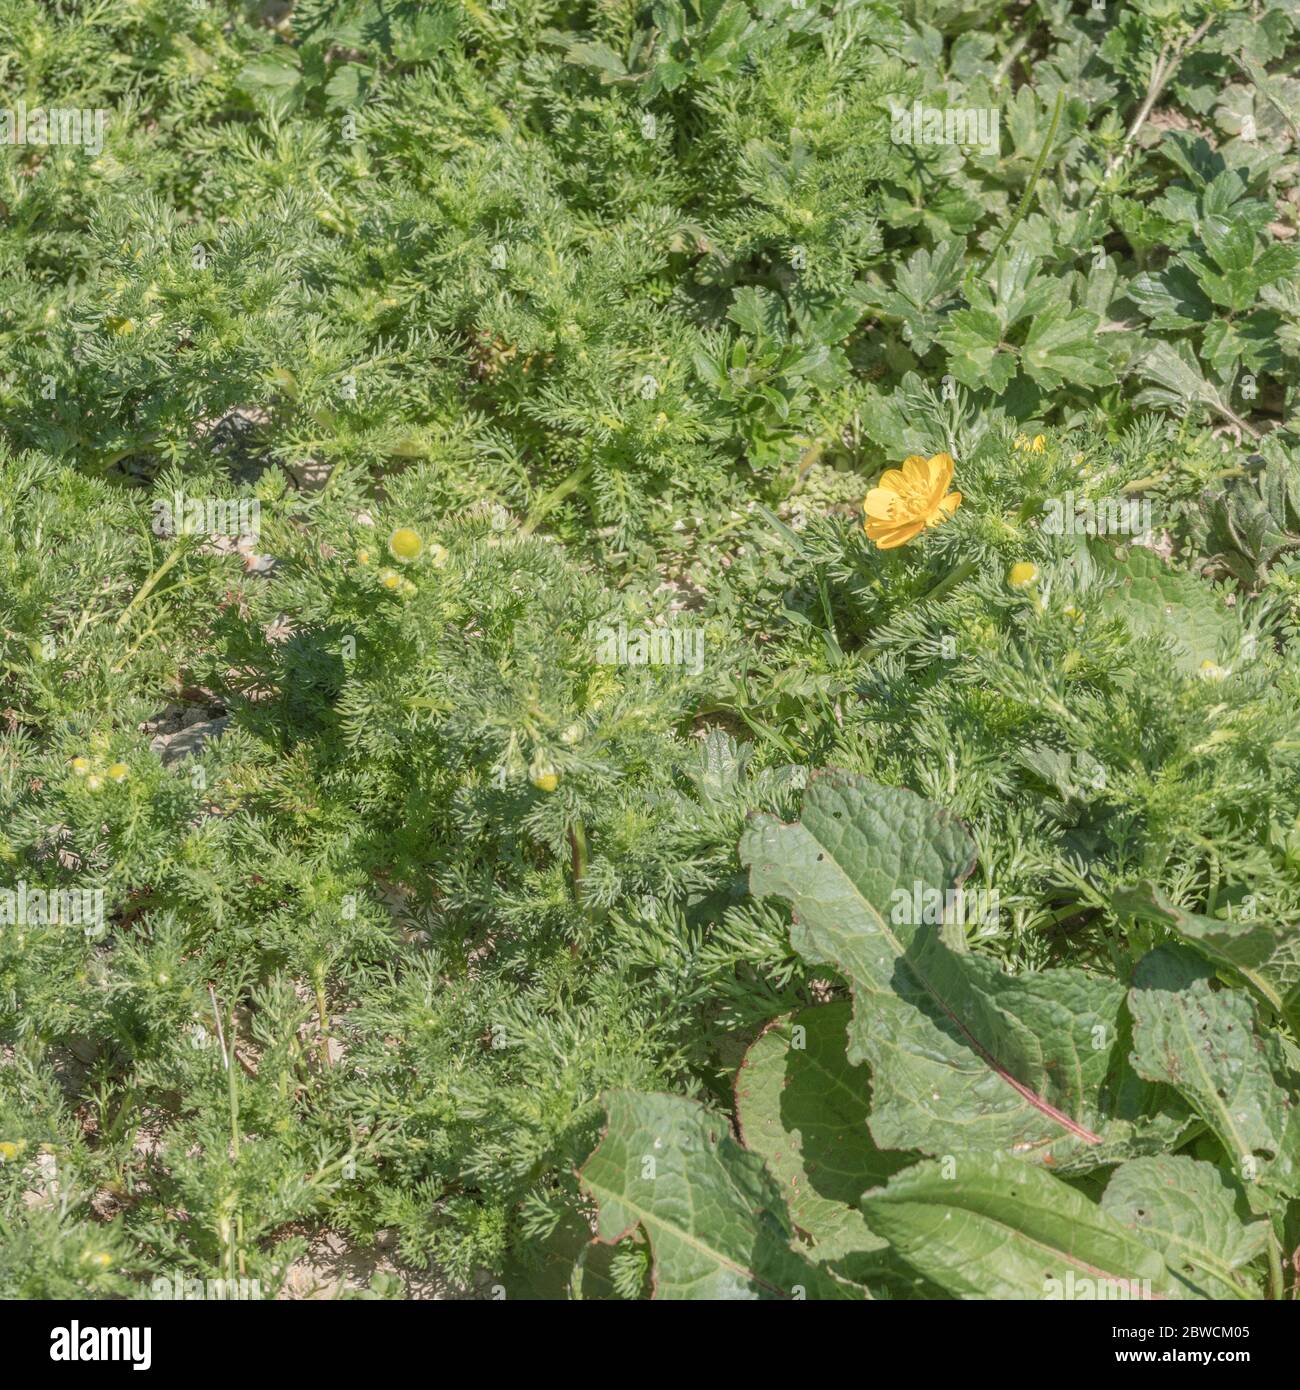 Mixed field weeds: Pineapple Weed / Matricaria discoidea, Broad-leaved Dock / Rumex obtusifolius & Creeping Buttercup Stock Photo